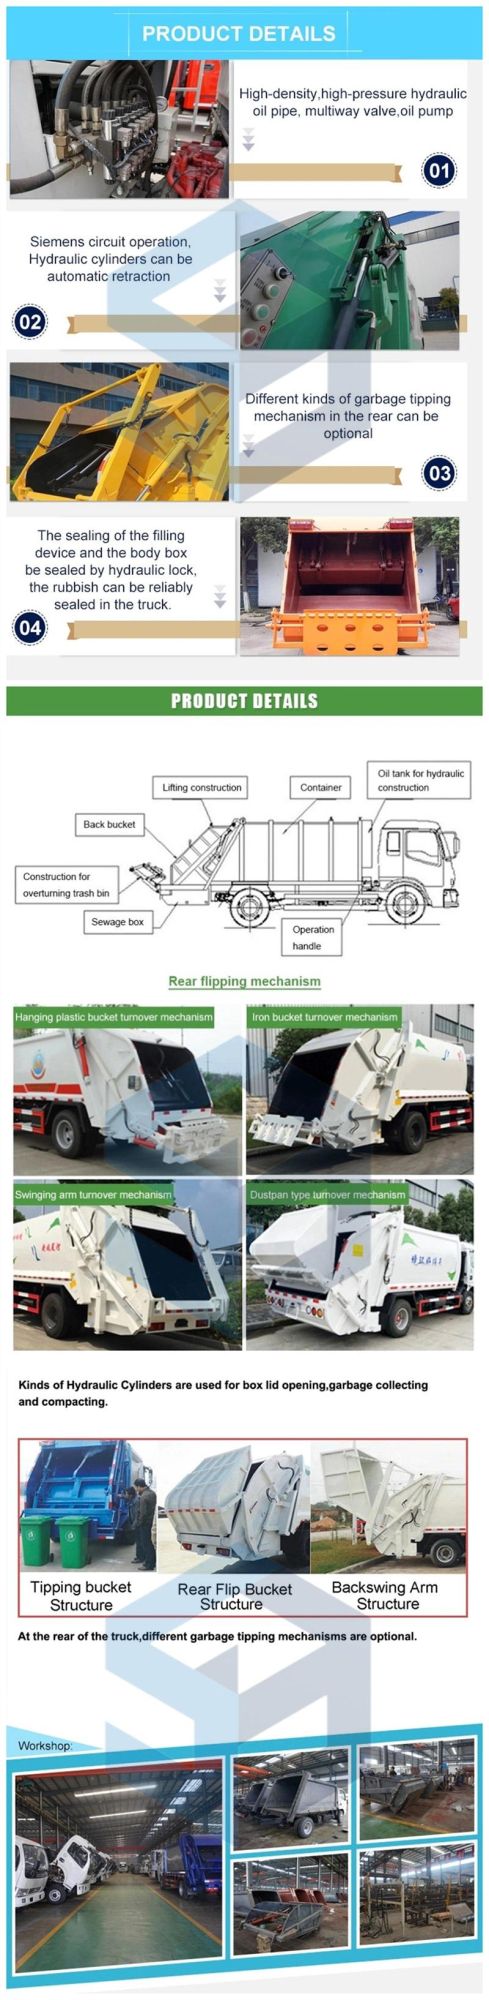 14 M3 Sealed Garbage Truck Dongfeng 4X2 Compress Refuse Collection Truck